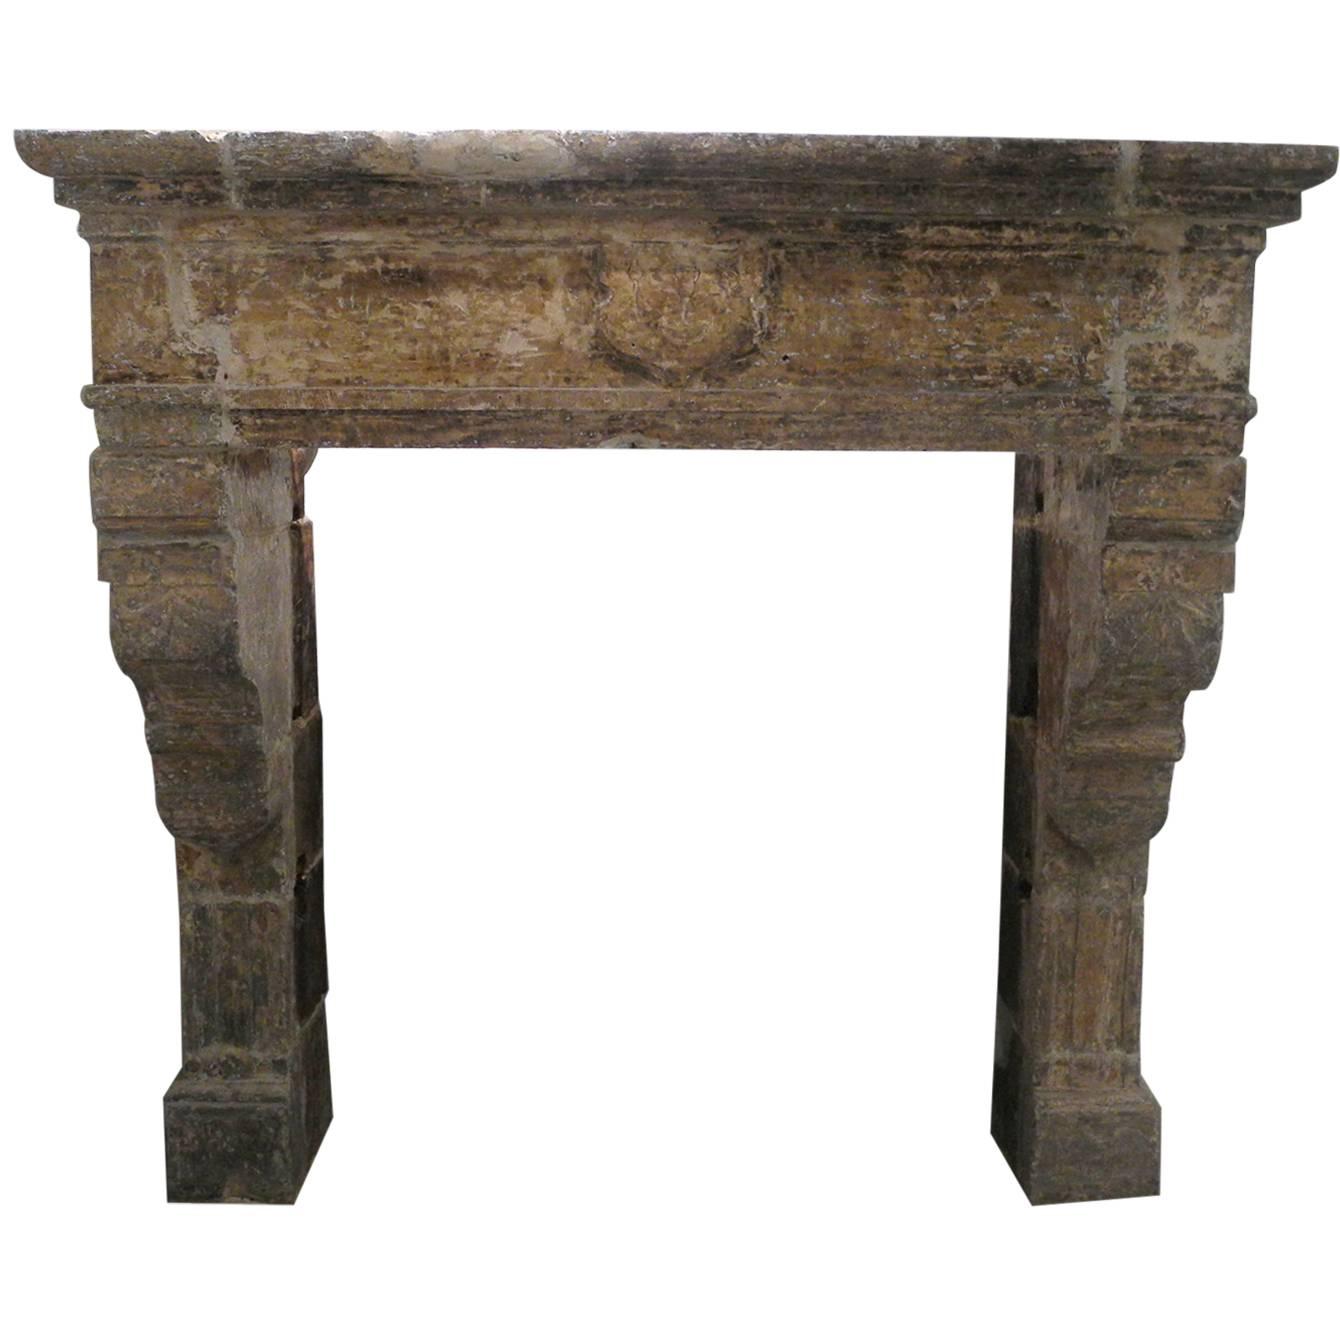 Antique Renaissance Mantel with Carved Legs and Crest Atop For Sale